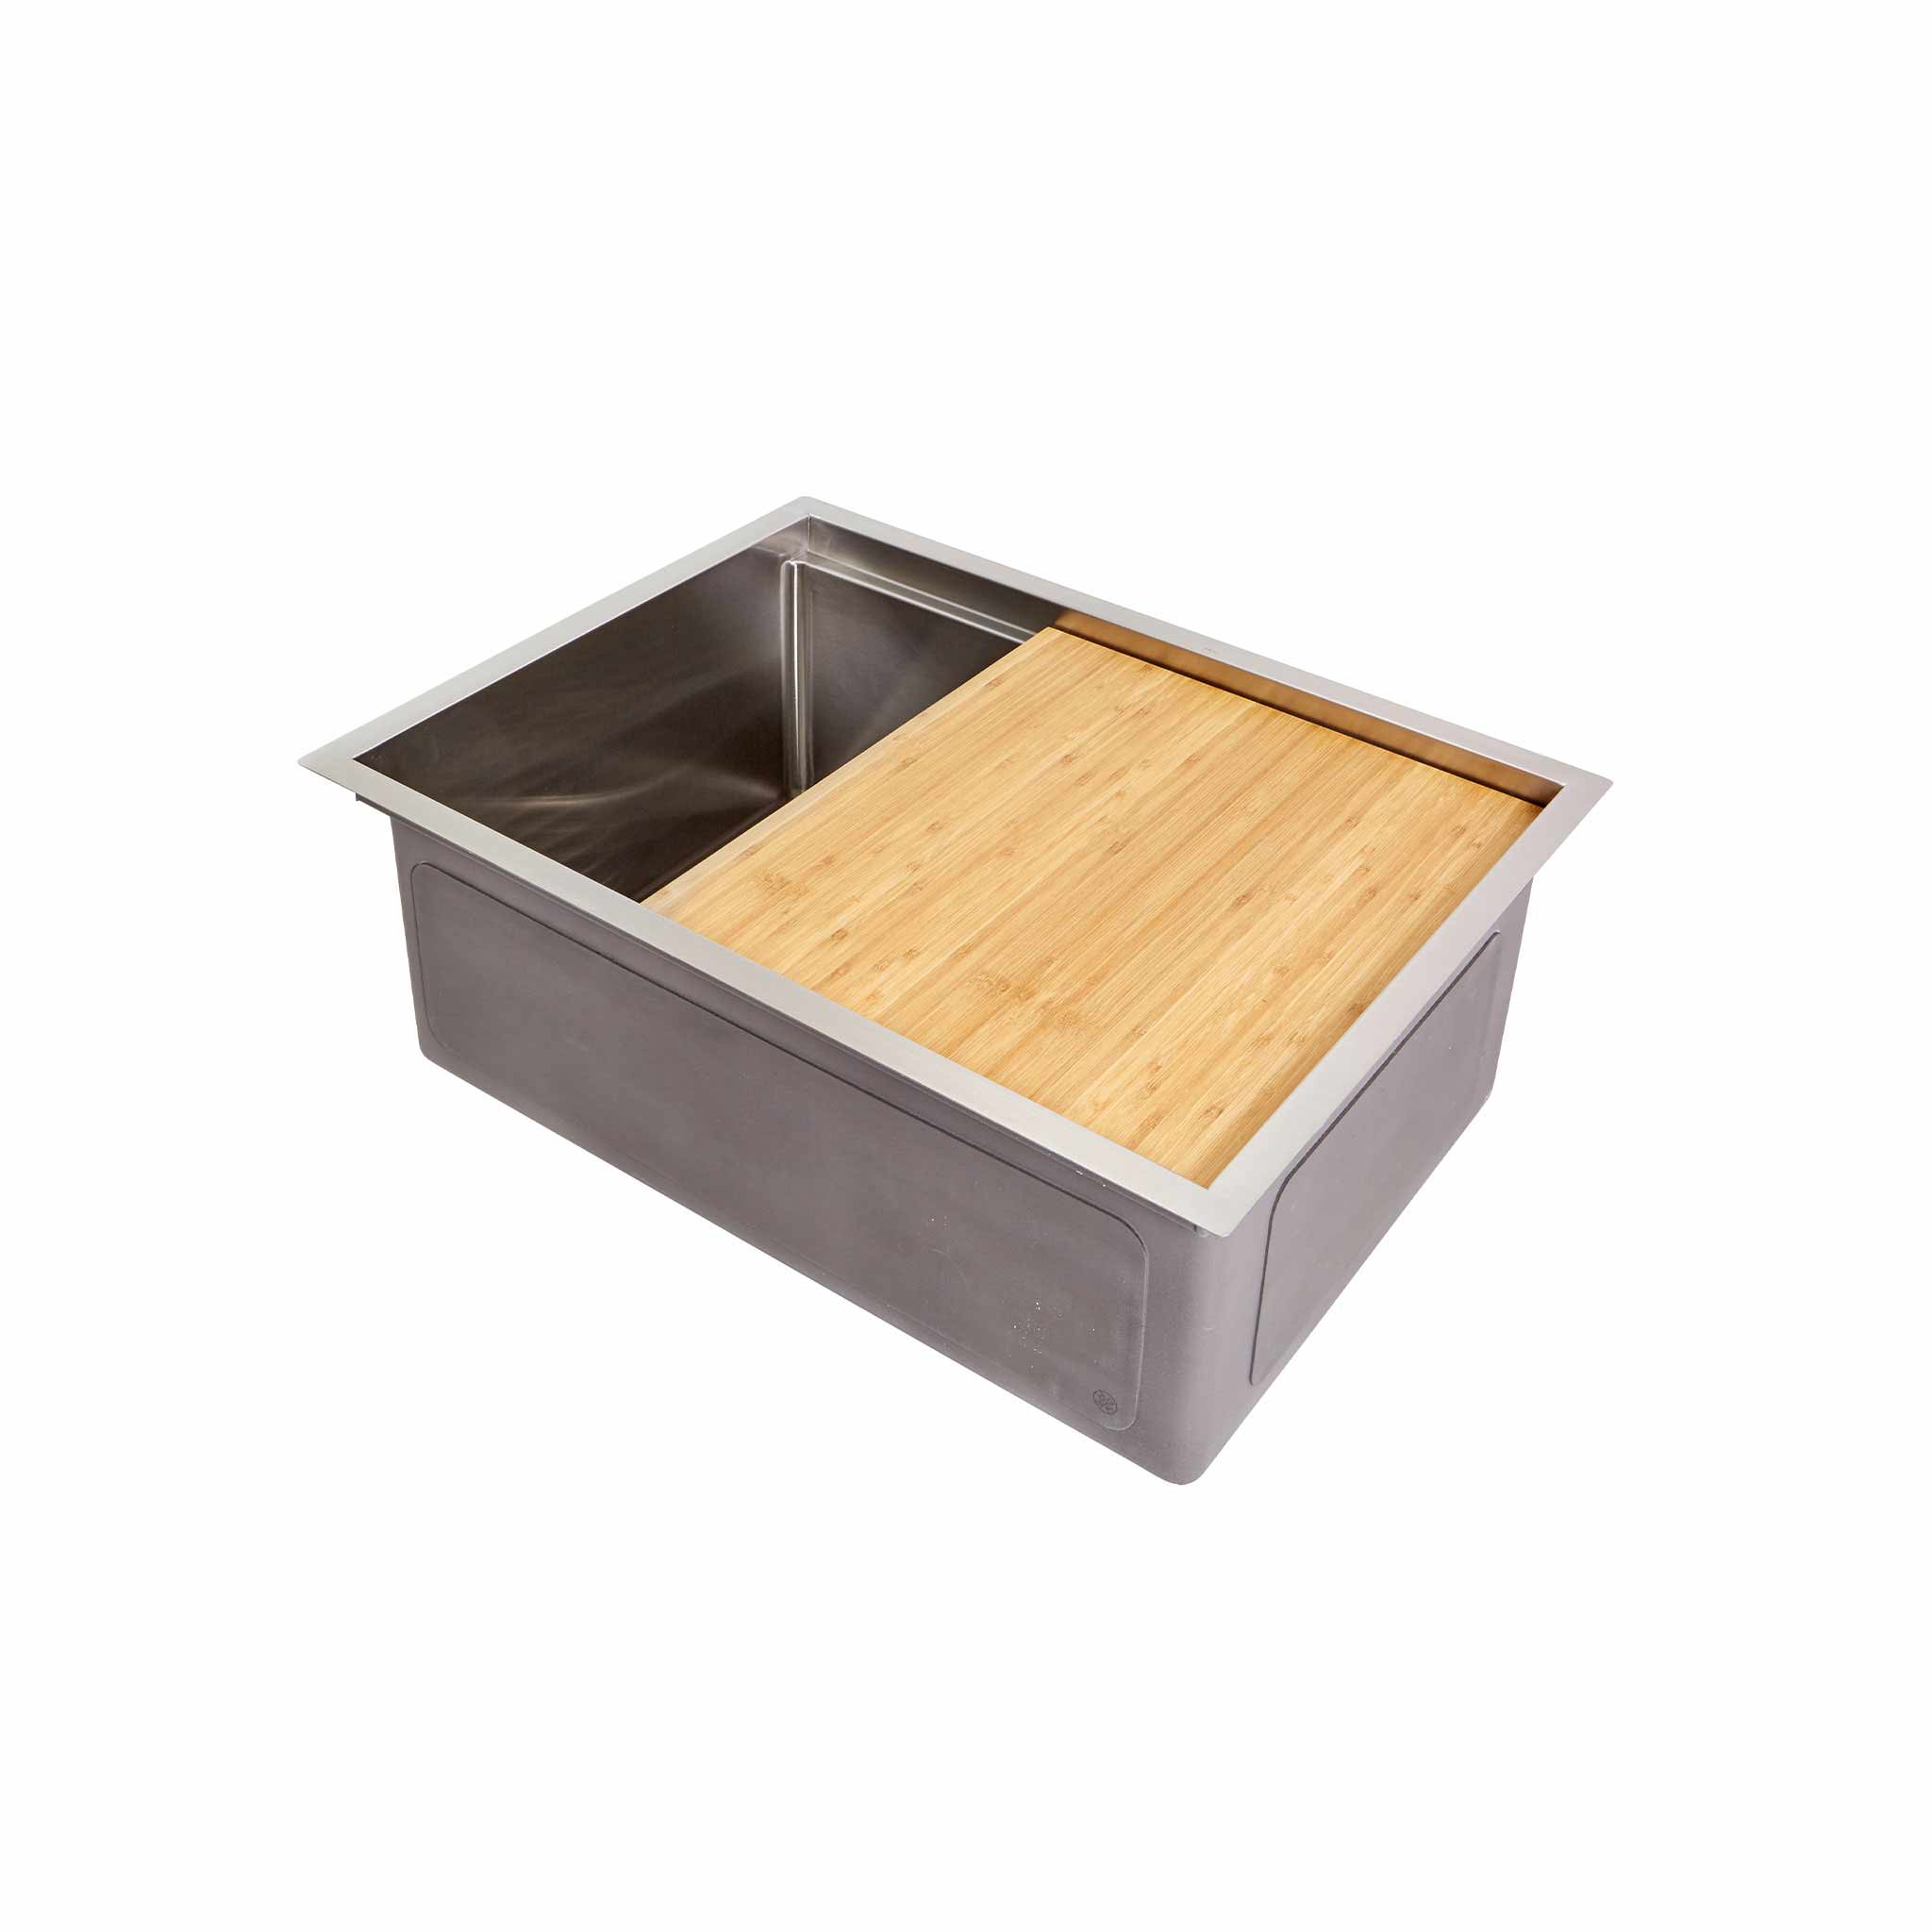 26" workstation kitchen sink with a bamboo cutting board accessory for the sink’s ledge.